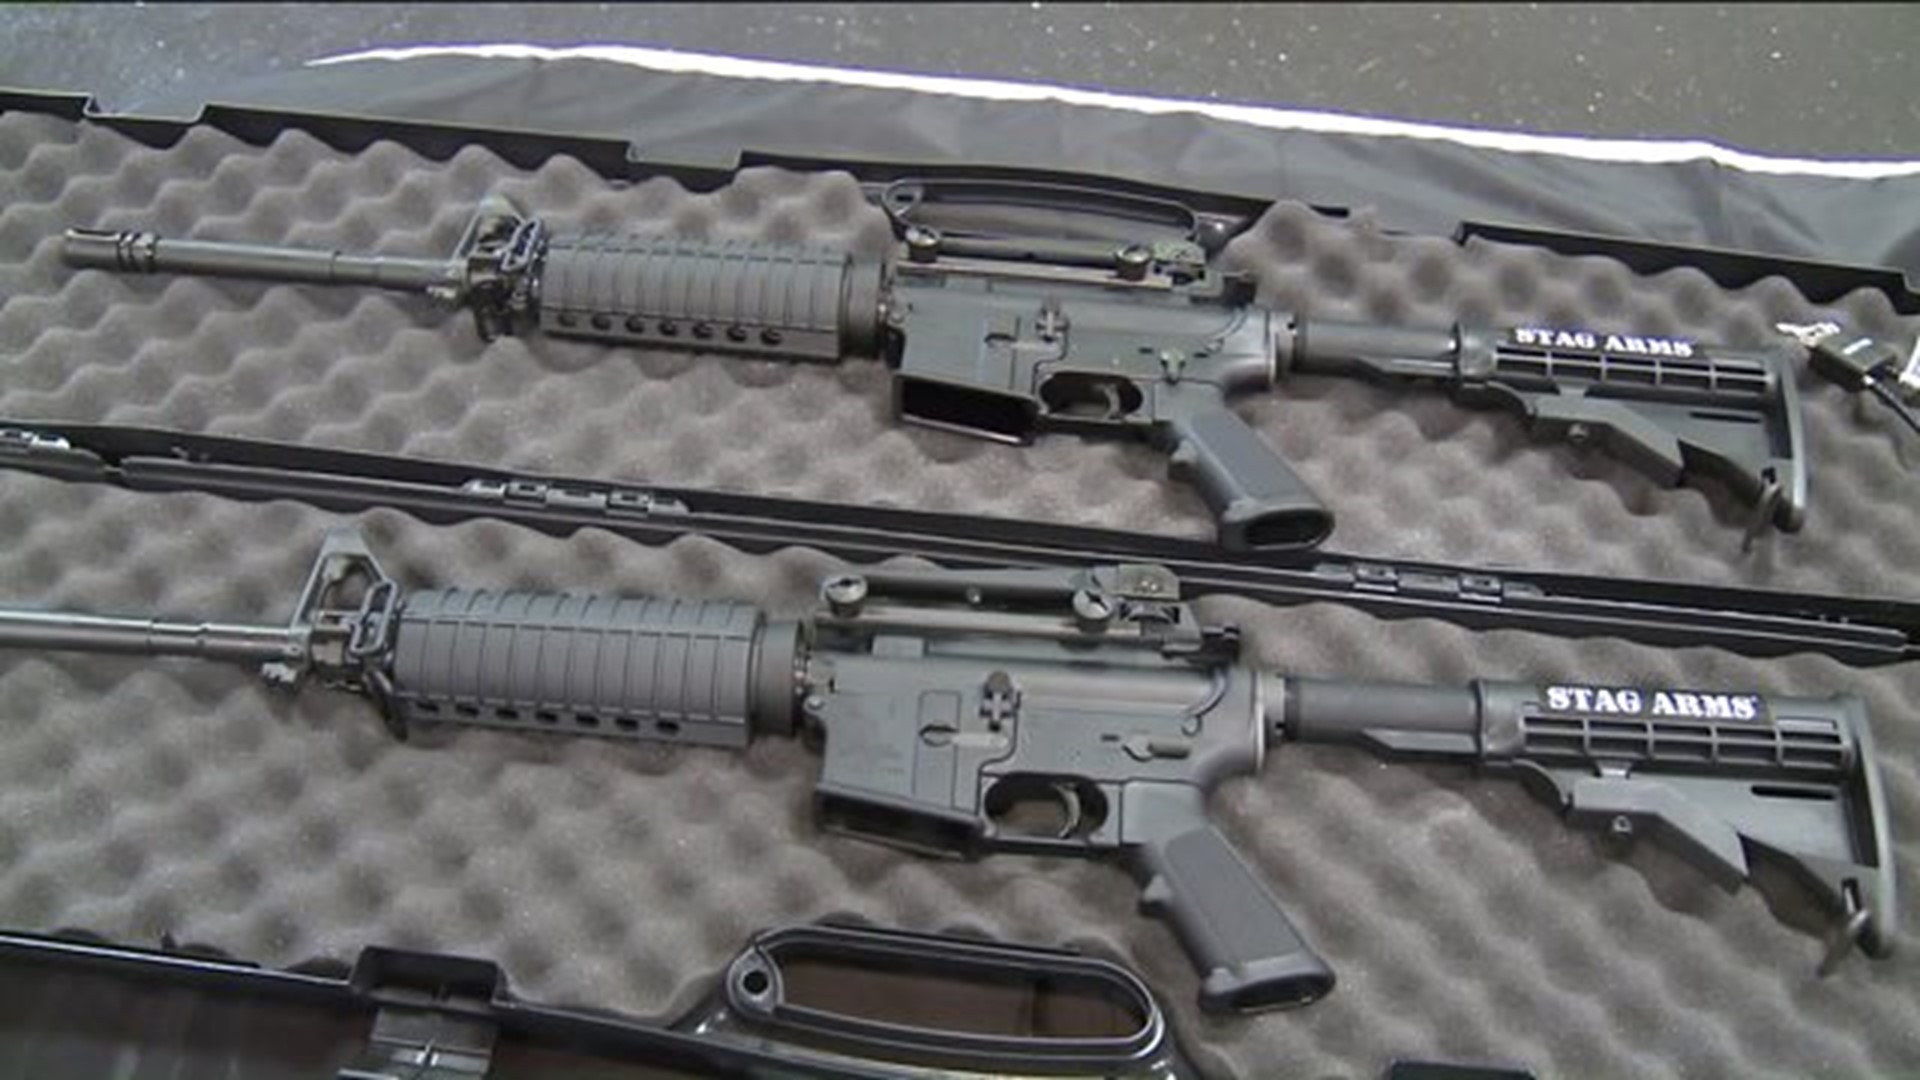 Stag Arms to close up shop in New Britain after federal firearms charges